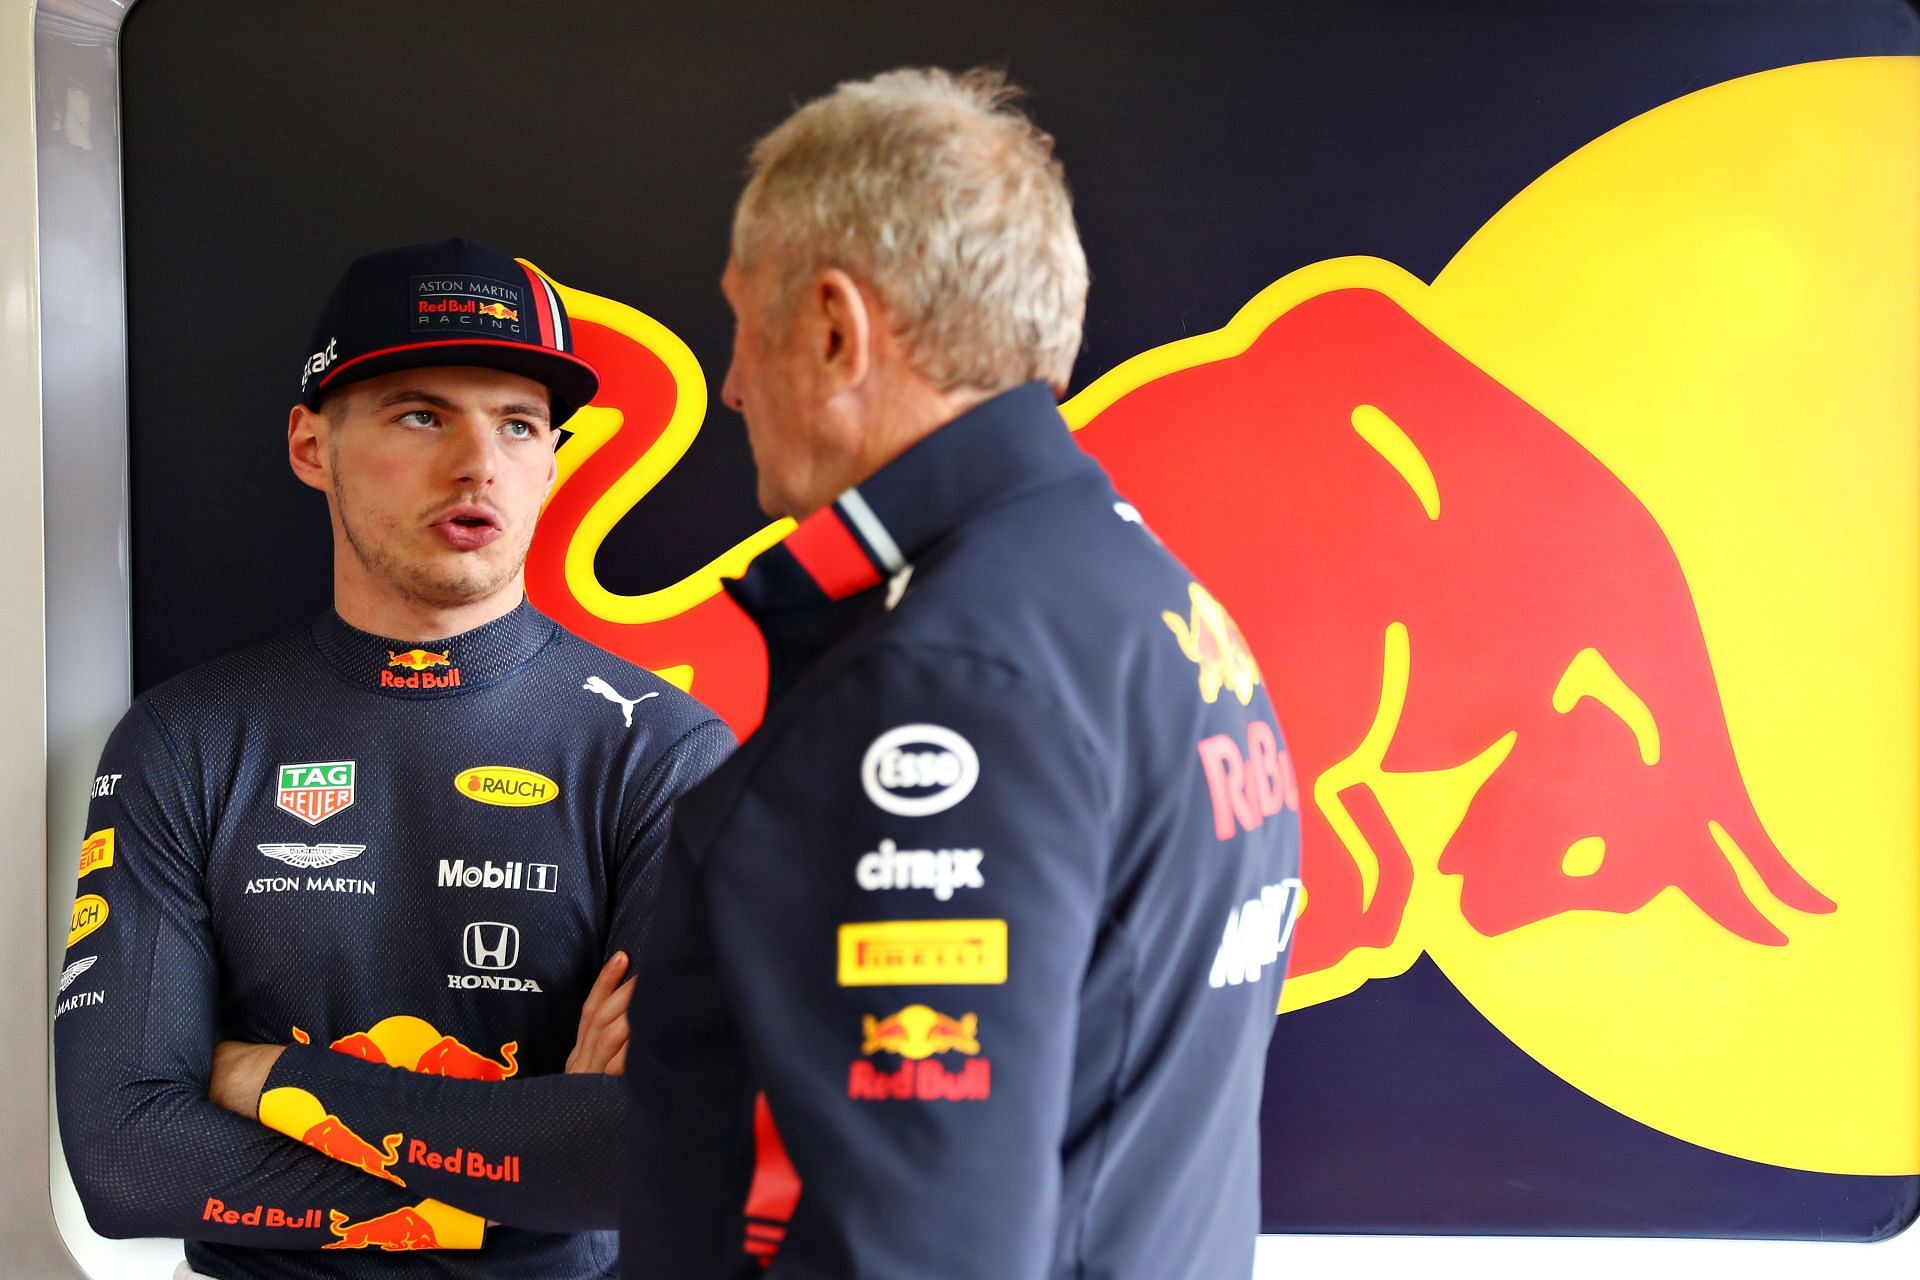 Max Verstappen will quickly adapt to 2022 cars, believes Helmut Marko